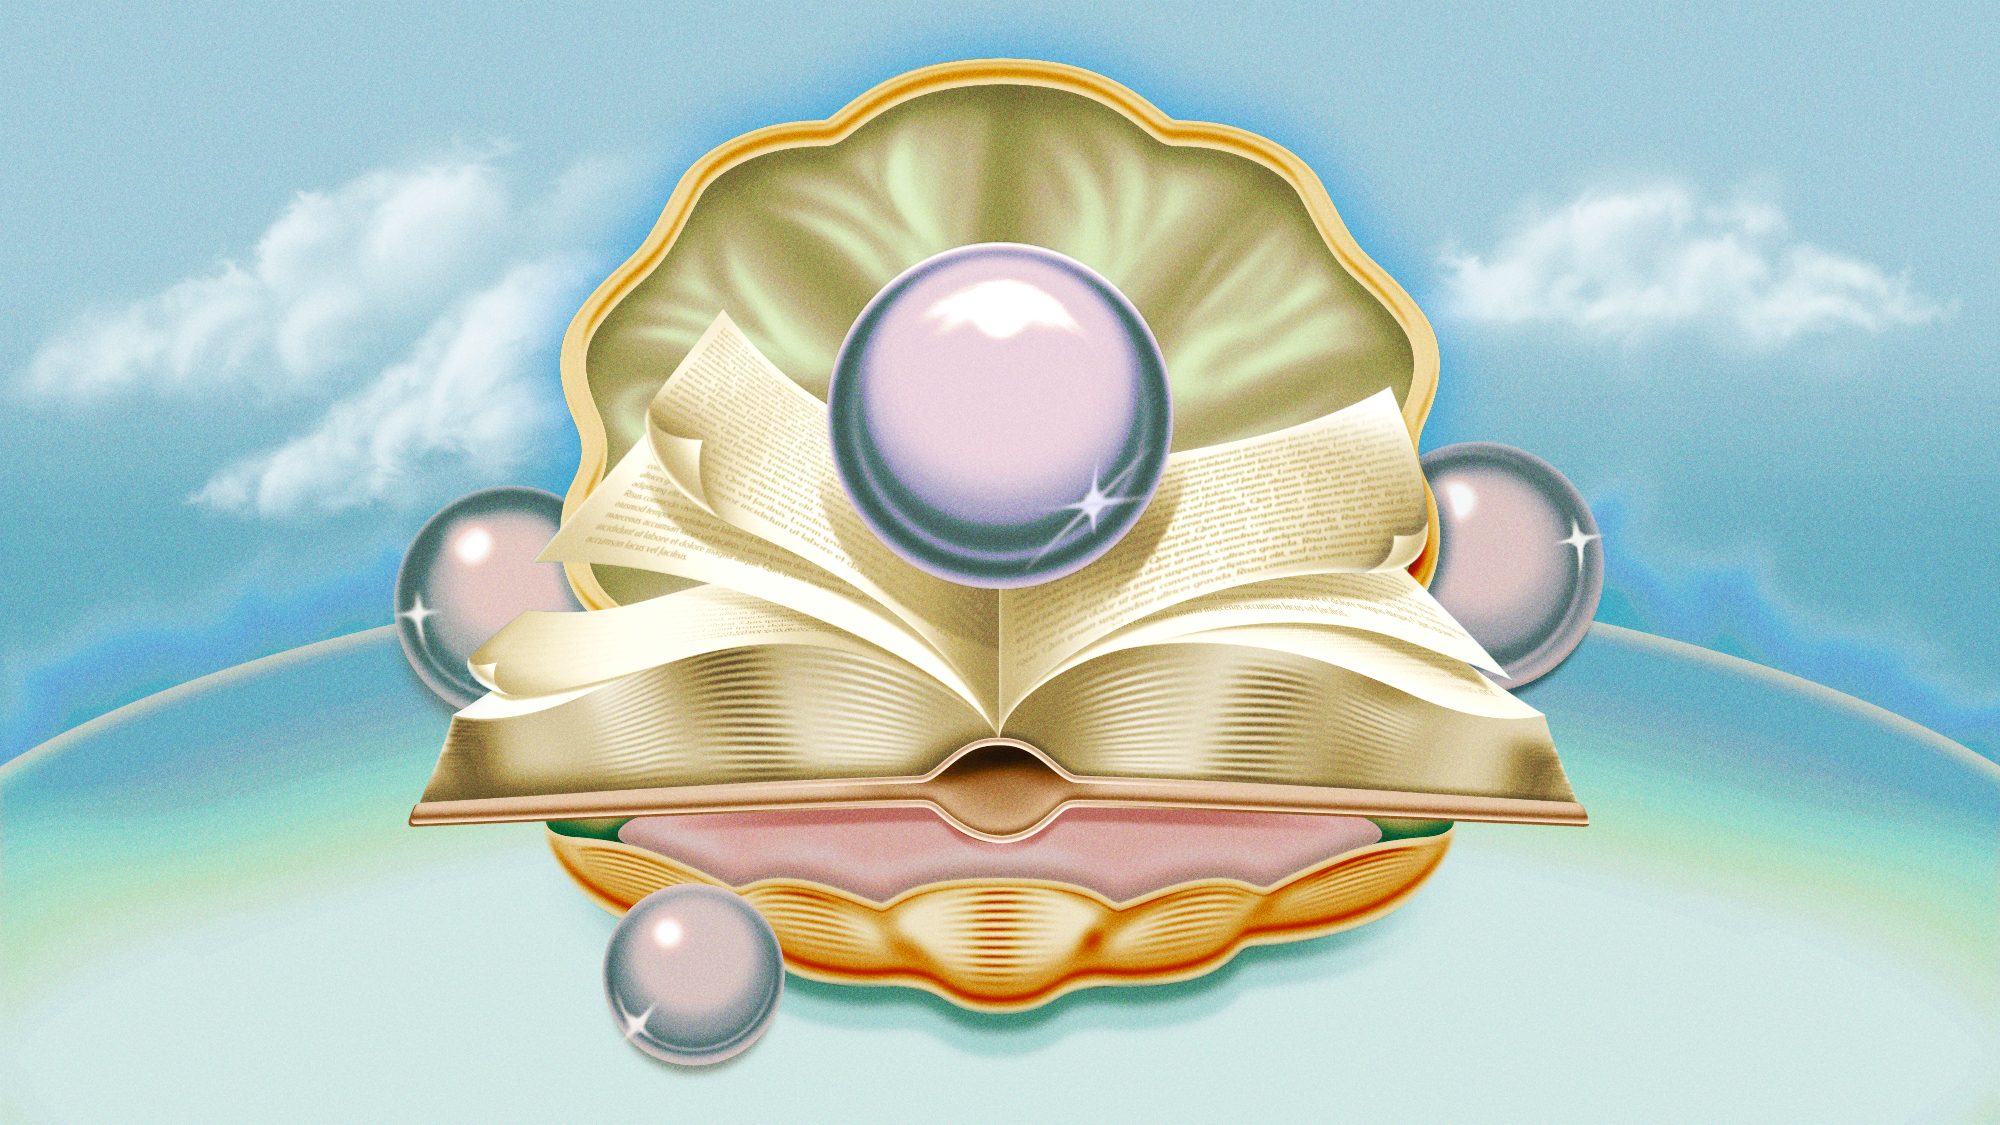 An illustration showing clam shells, pearls, and a book